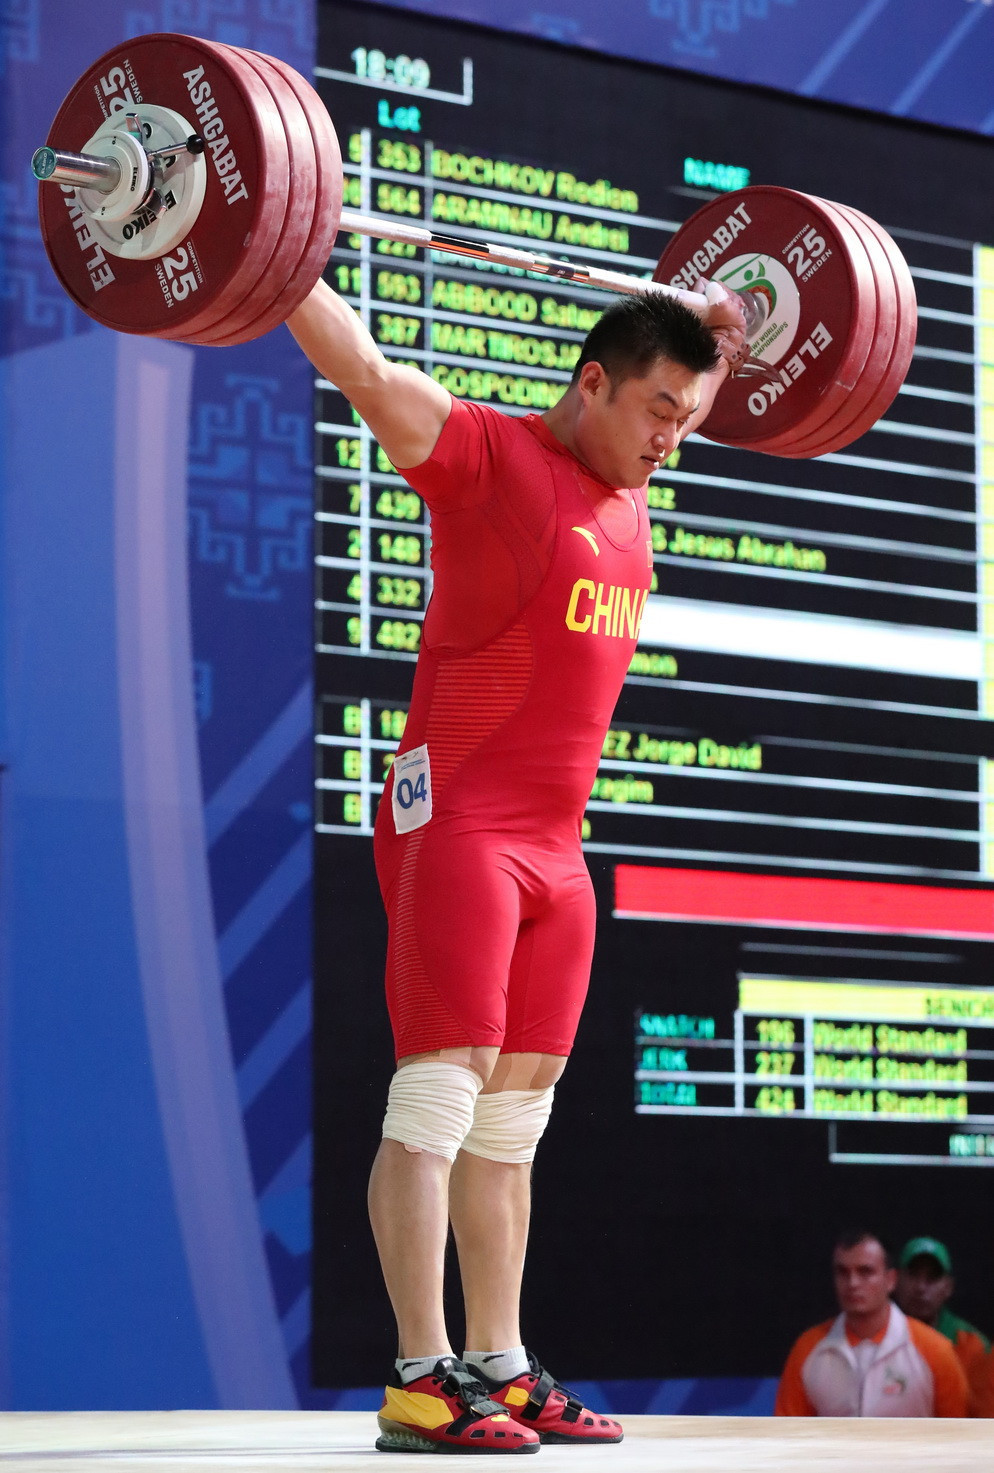 The silver medallist in the total was China’s Yang Zhe ©IWF